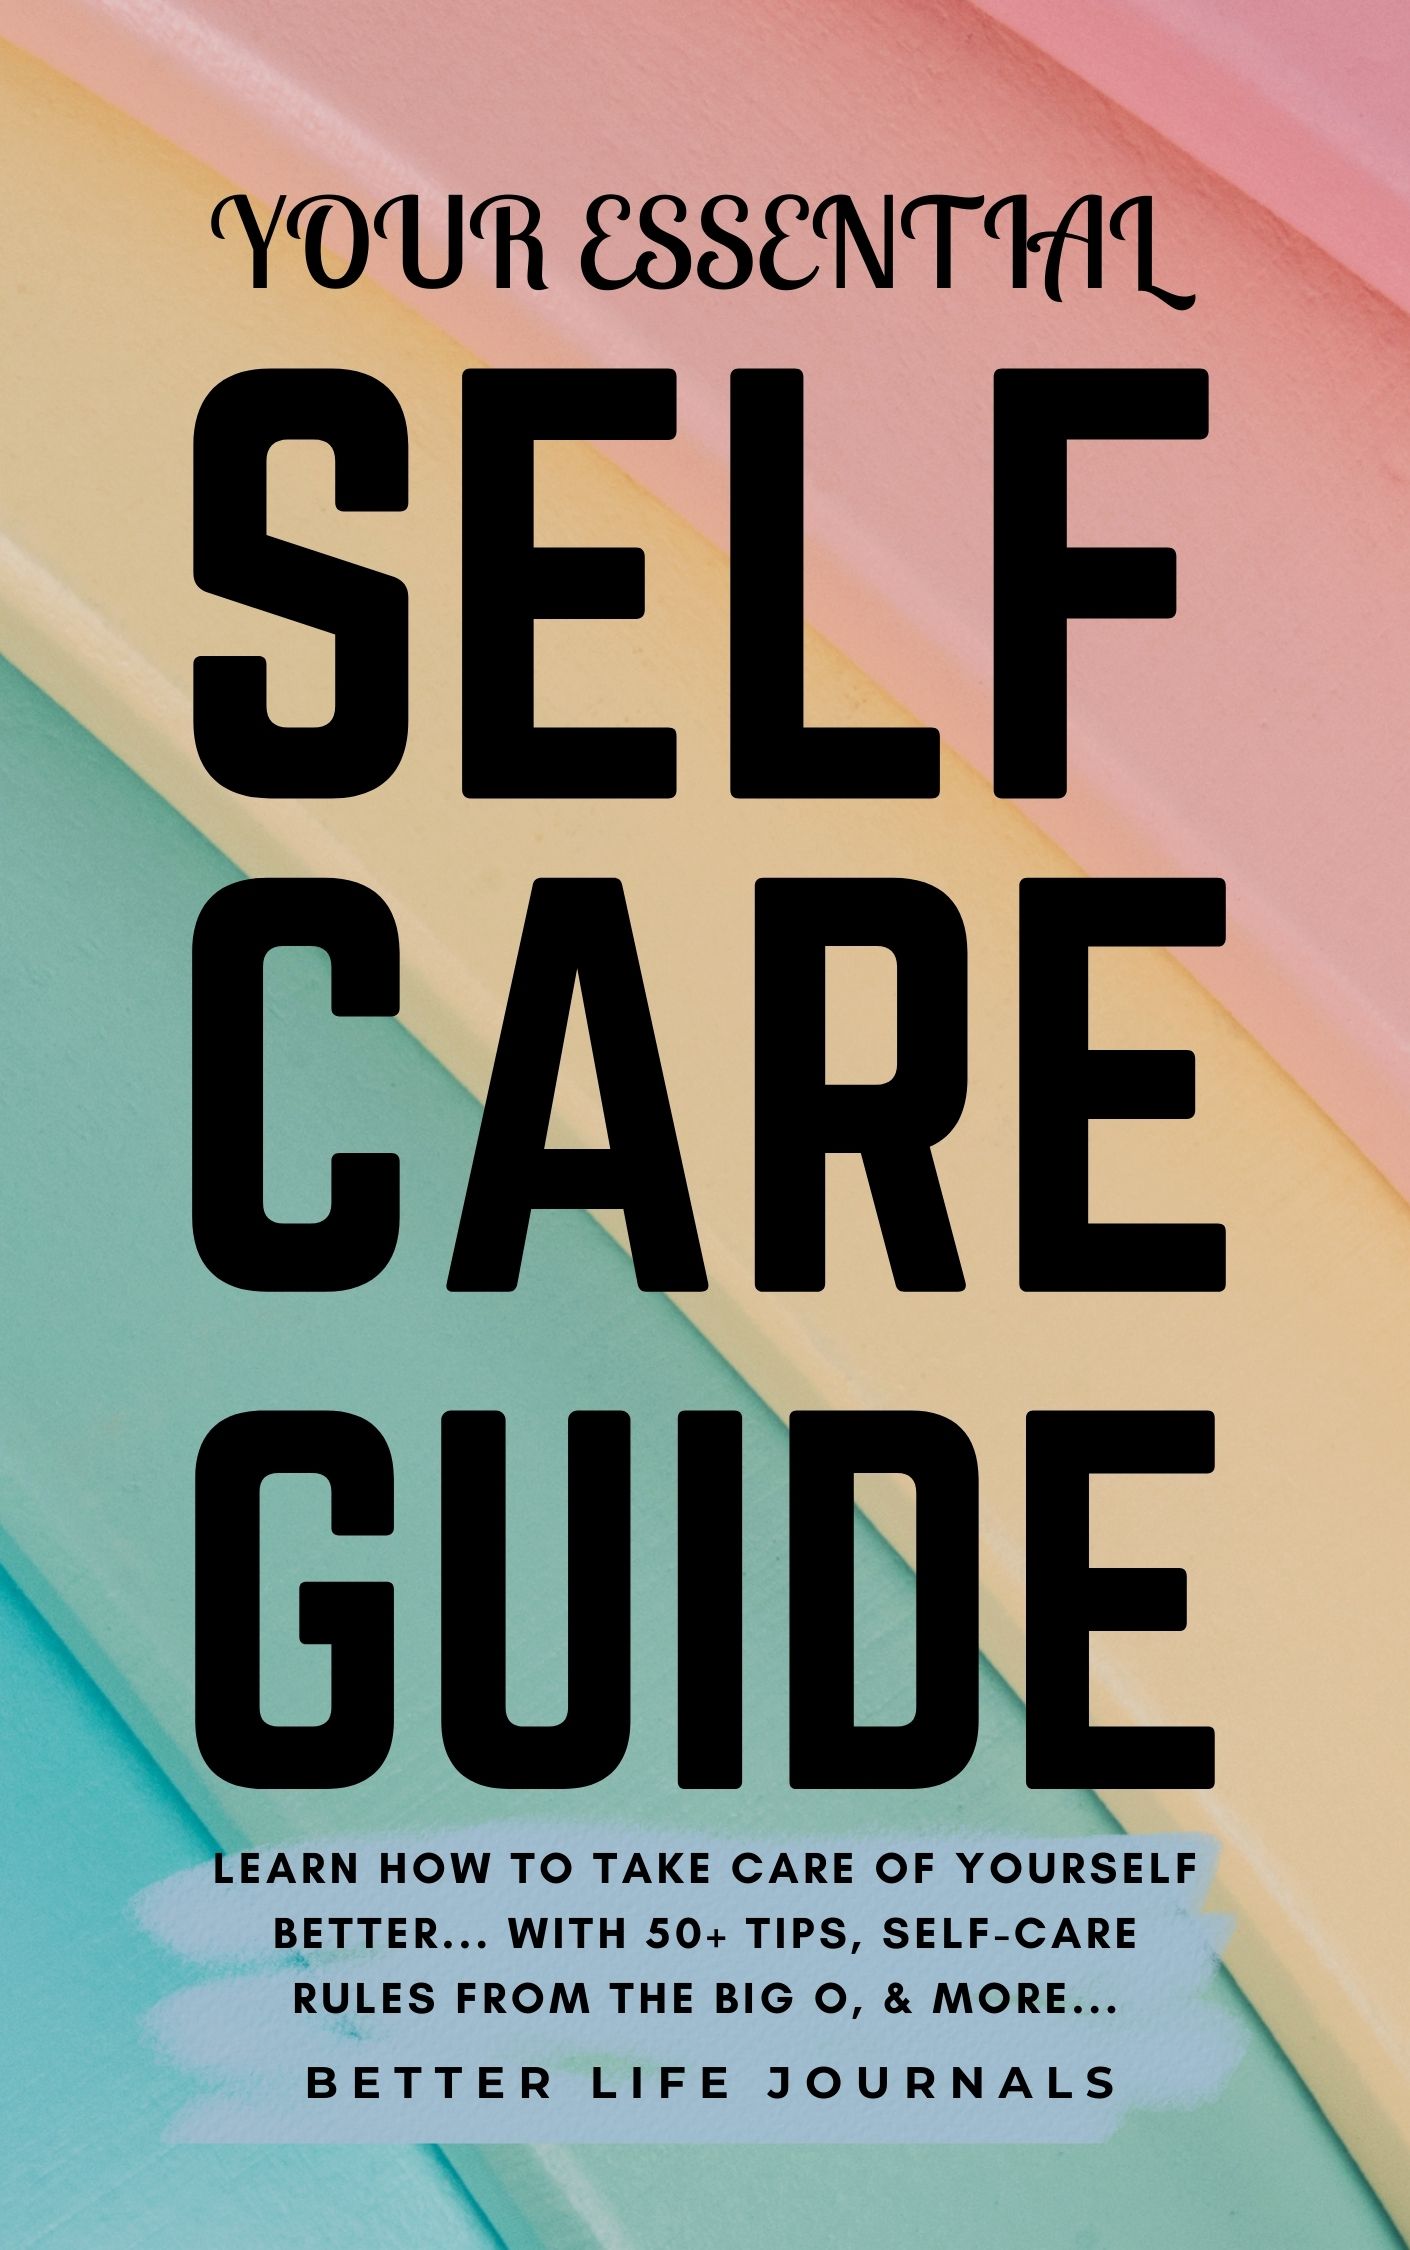 FREE: Your Essential Self Care Guide by Better Life Journals